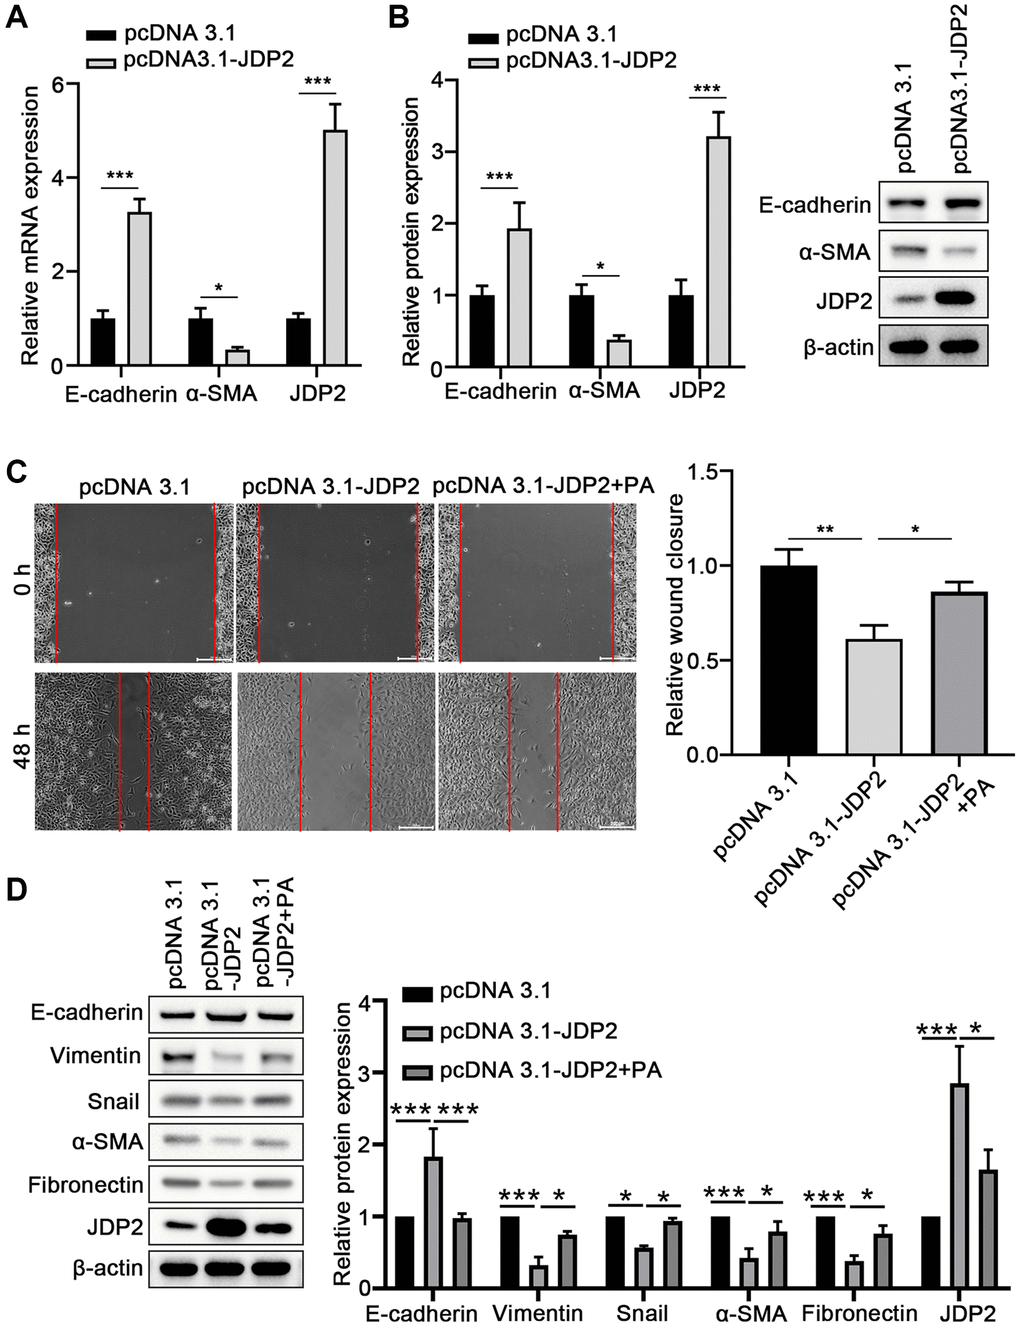 JDP2 inhibited the EMT of ARPE-19 cells. (A) The mRNA levels of E-cadherin and α-SMA in ARPE-19 cells transfected with empty vector or JDP2-expressing plasmid were determined via quantitative PCR. (B) Relative protein expression E-cadherin and α-SMA in ARPE-19 cells transfected with empty vector or JDP2-expressing plasmid (n = 3 for each group). (C) Migration of ARPE-19 cells after the overexpression of JDP2 or/and PA treatment (n = 3 for each group). (D) Expression of E-cadherin, Vimentin, Snail, α-SMA, Fibronectin, and JDP2 in ARPE-19 cells after the overexpression of JDP2 or/and PA treatment (n = 3 for each group). *P **P ***P 